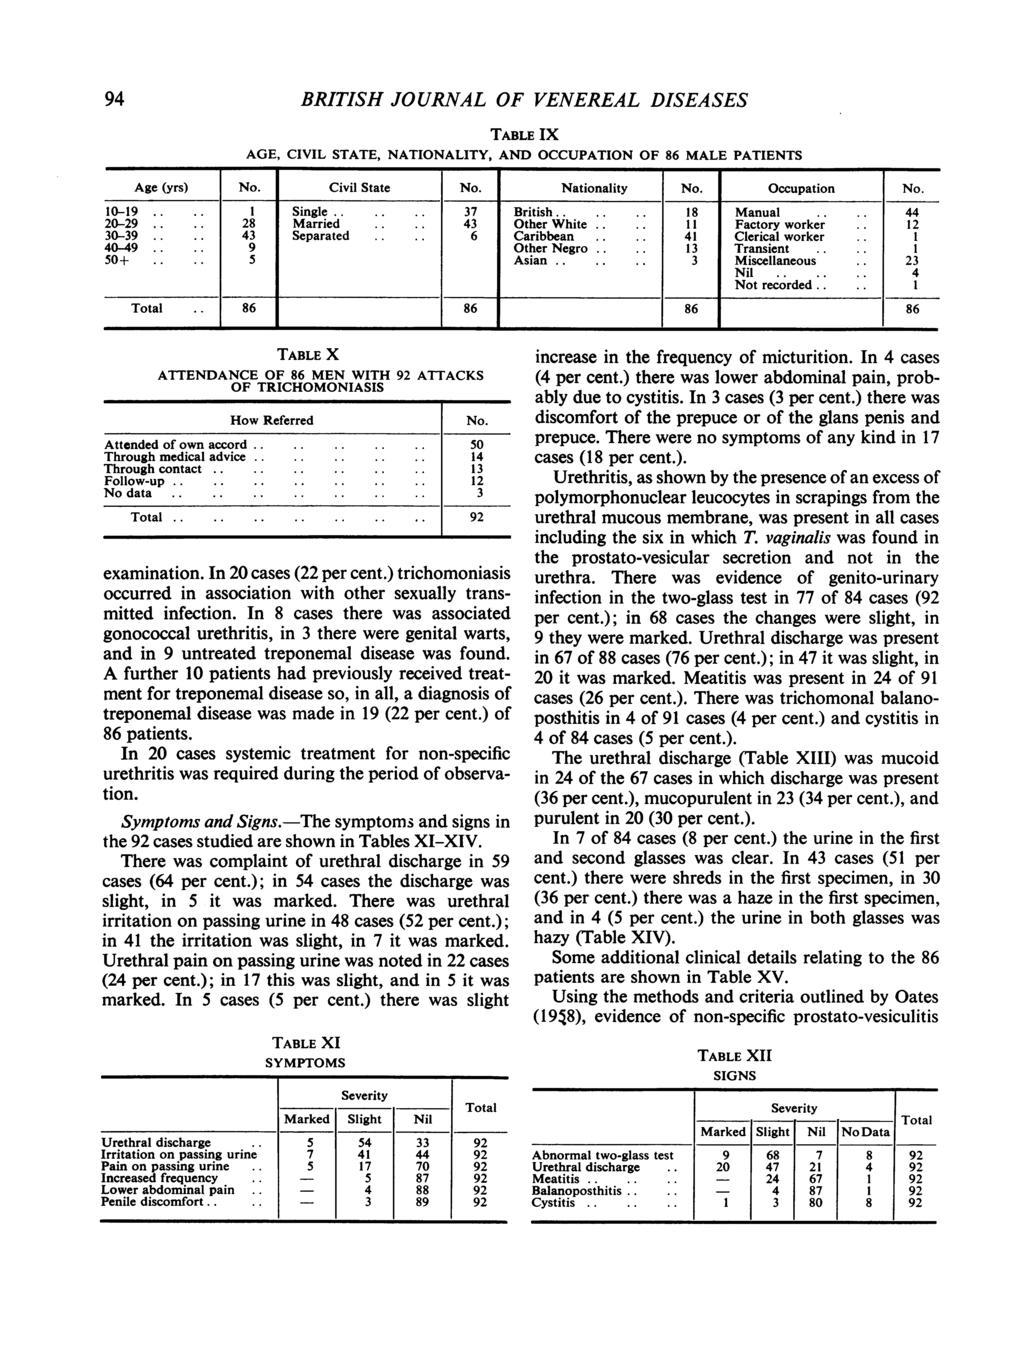 94 BRITISH JOURNAL OF VENEREAL DISEASES TABLE IX AGE, CIVIL STATE, NATIONALITY, AND OCCUPATION OF 86 MALE PATIENTS Age (yrs) No. Civil State No. Nationality No. Occupation No. 10-19.... 1 Single.